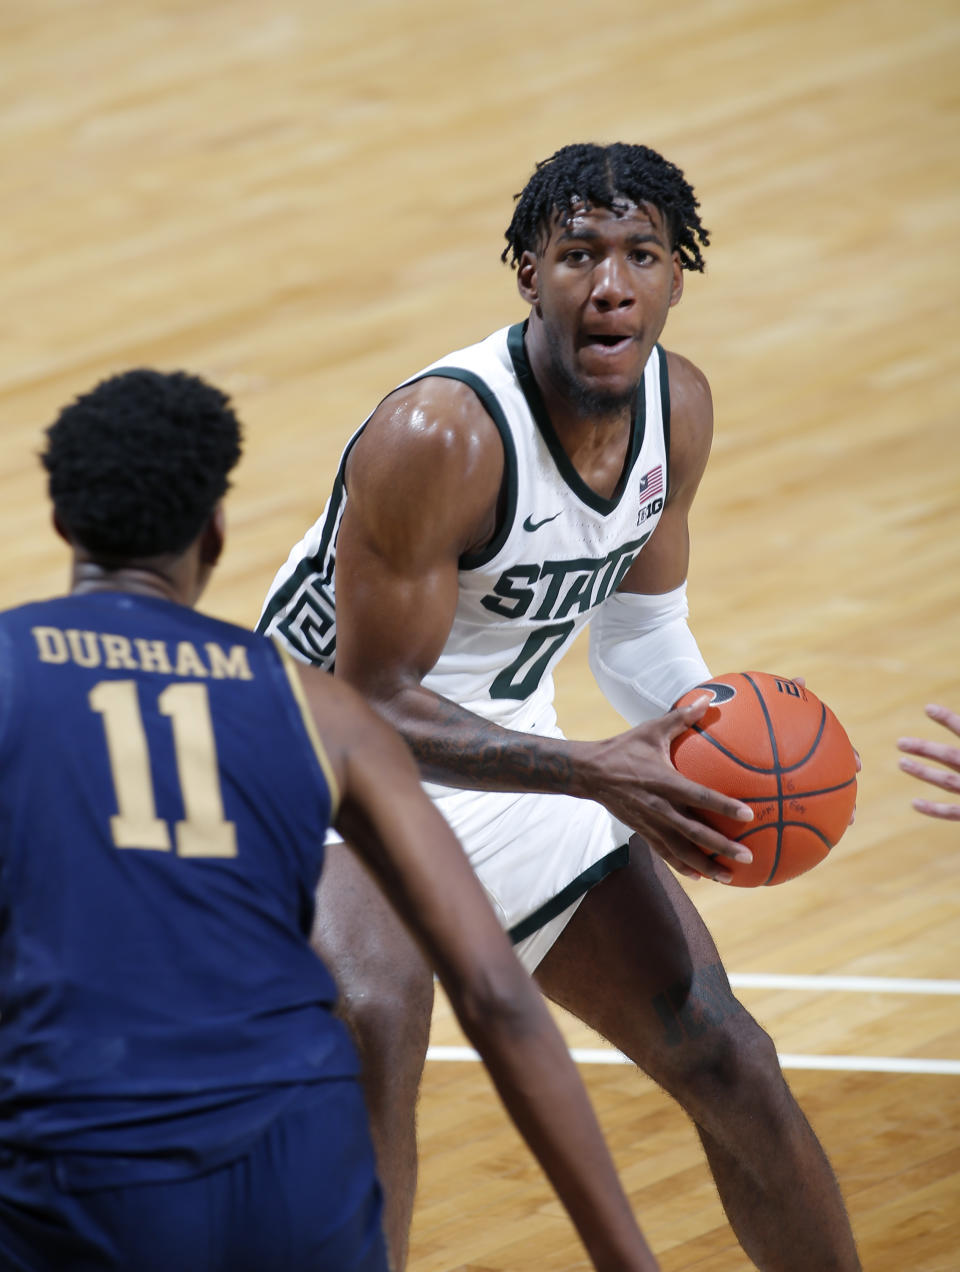 Michigan State's Aaron Henry, right, looks to drive against Notre Dame's Juwan Durham (11) during the second half of an NCAA college basketball game Saturday, Nov. 28, 2020, in East Lansing, Mich. Michigan State won 80-70. (AP Photo/Al Goldis)